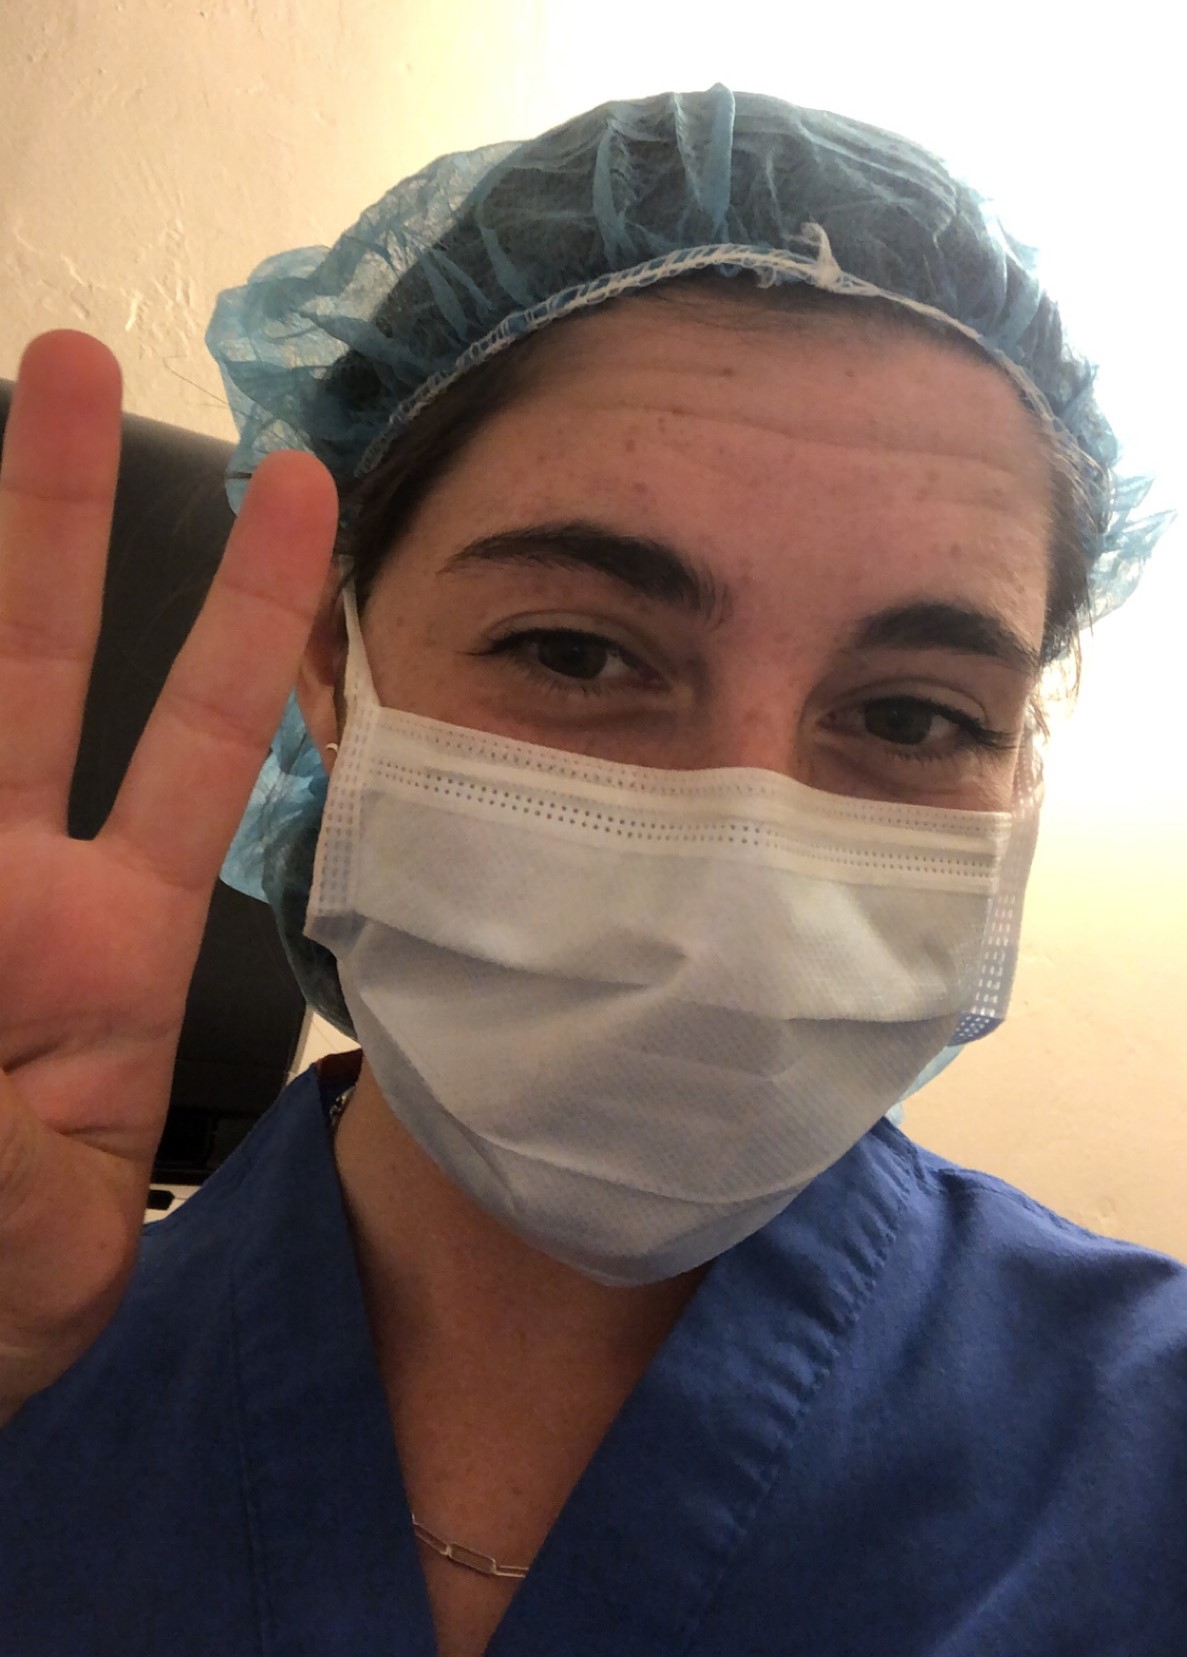 A close-up of a person with brown eyes and freckles who’s wearing blue scrubs, a white medical facemask, and a blue surgical scrub cap. They hold up two fingers in a “peace” sign.